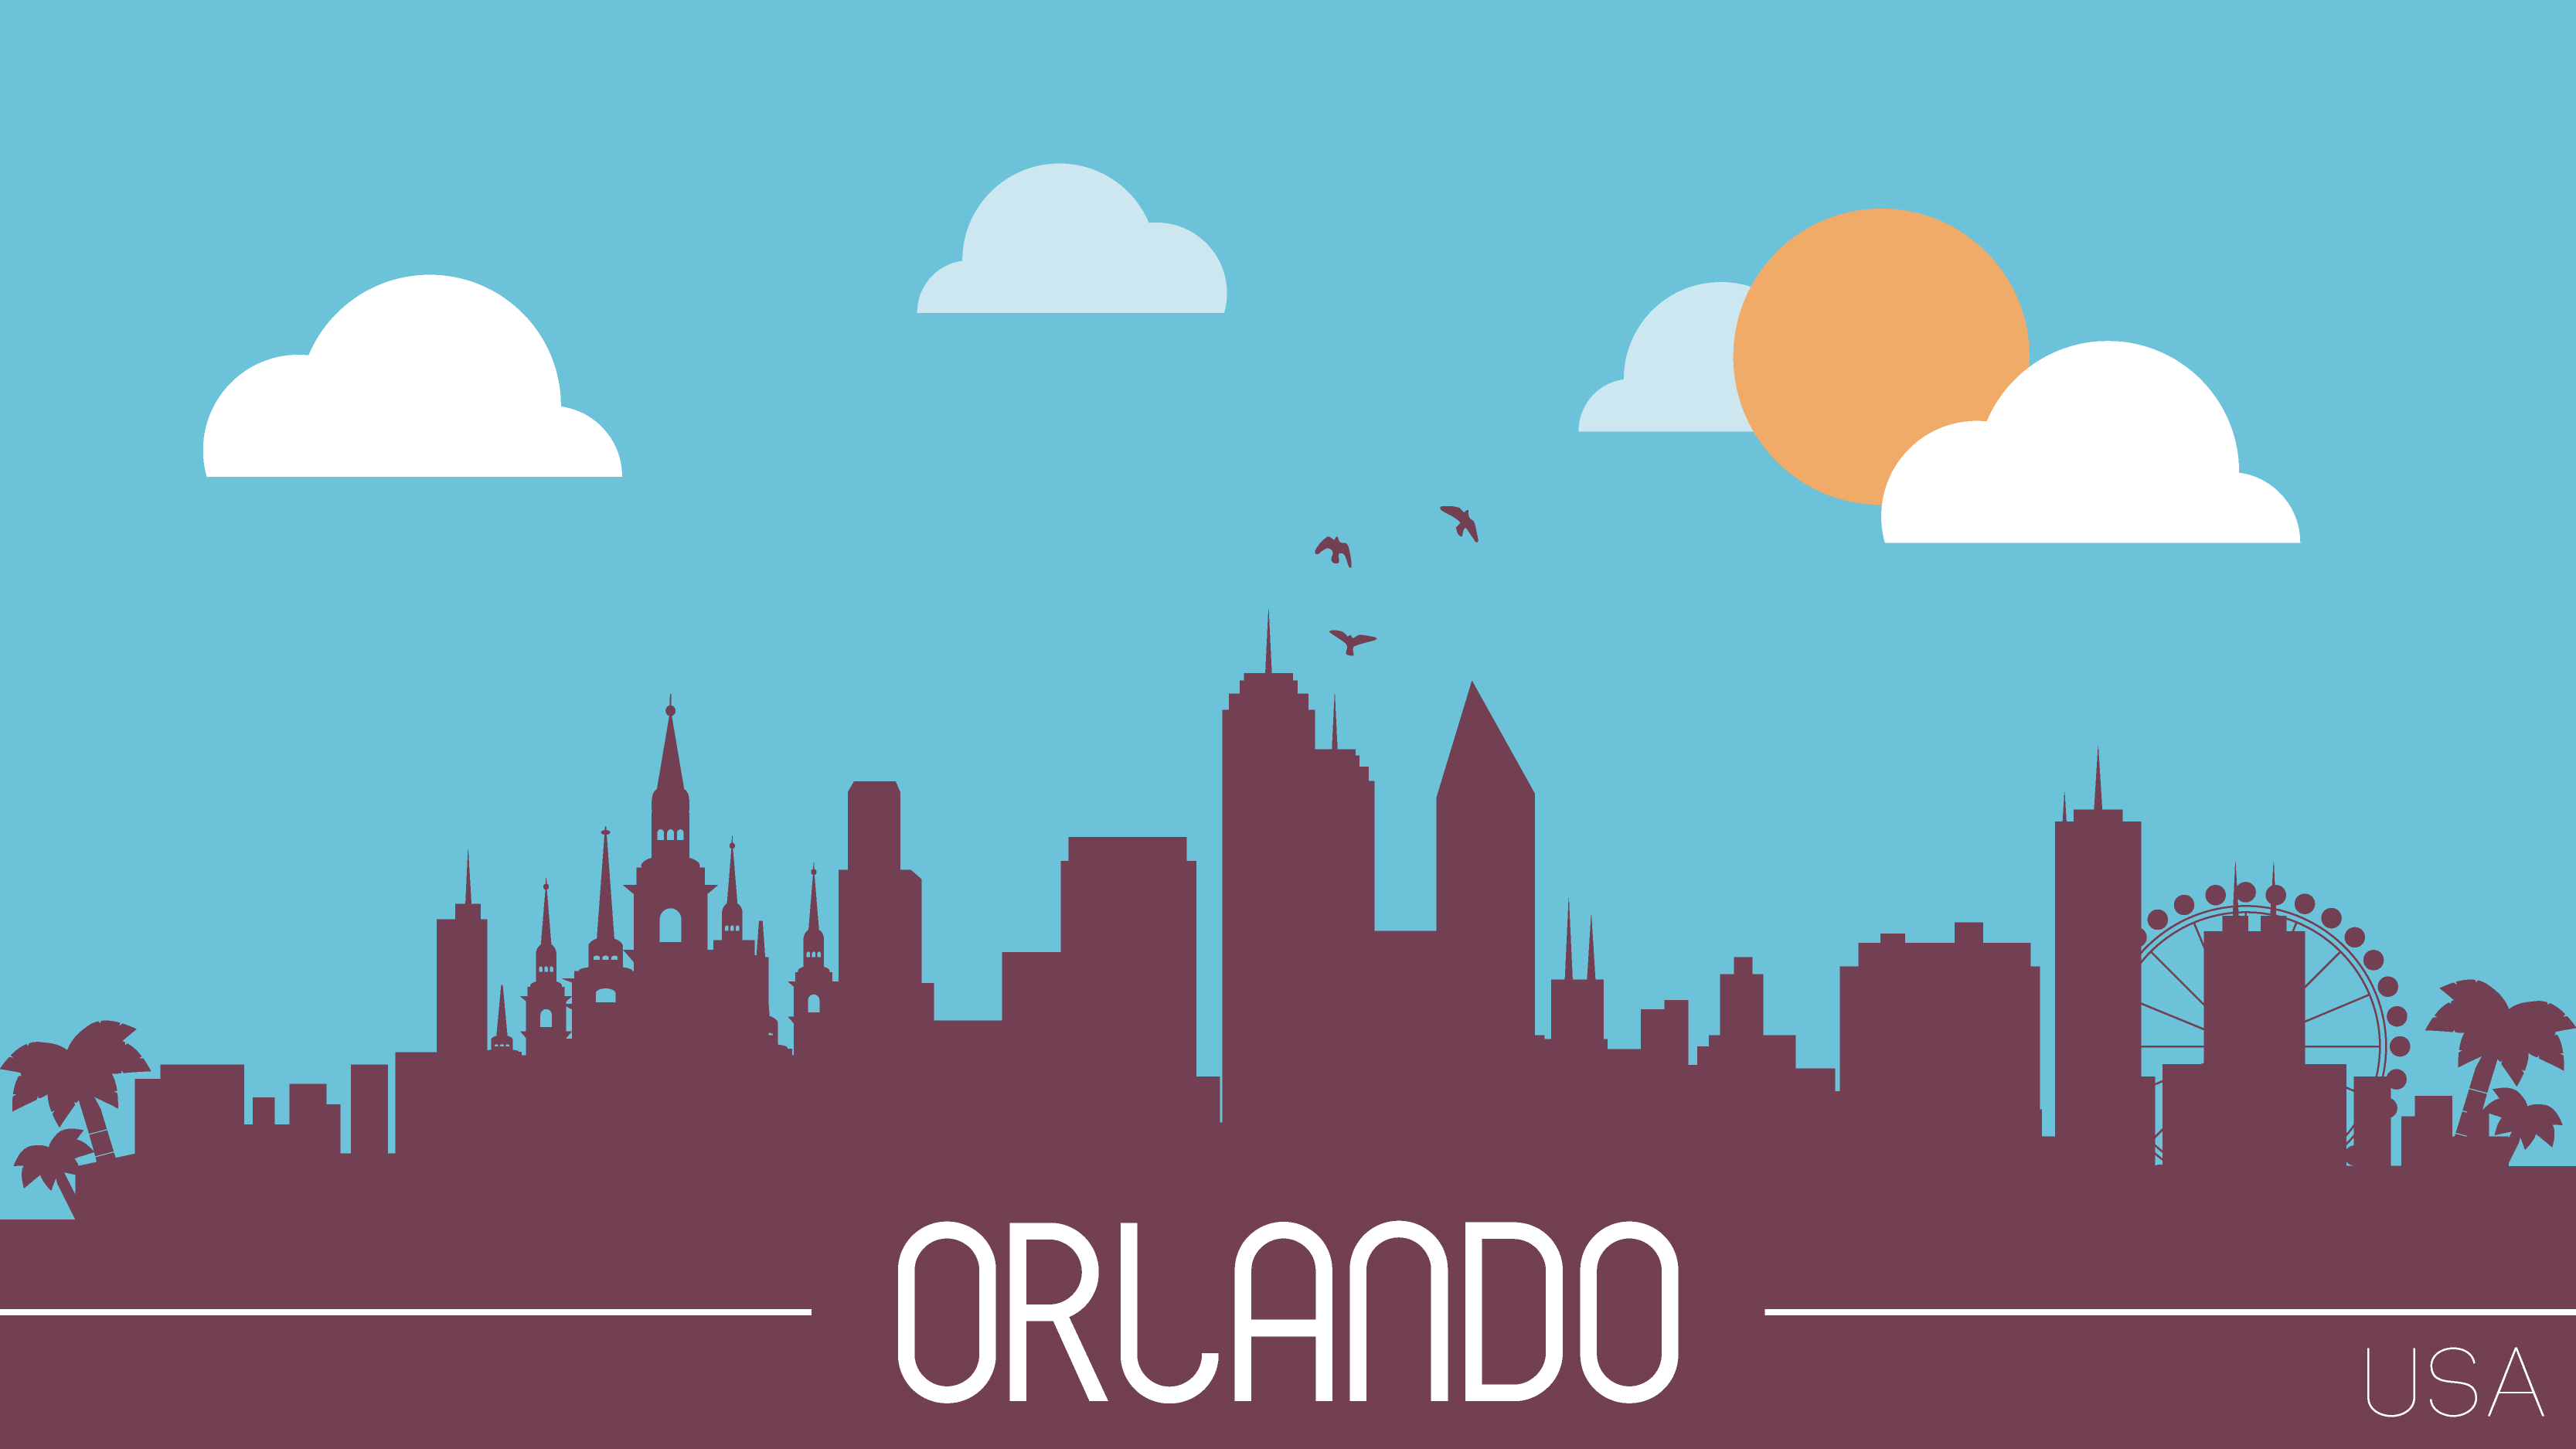 animated photo of the Orlando skyline in purple tracing and a blue sky with white clouds and a yellow sun in the back. The bottom says ORLANDO in large letters and beneath that says USA